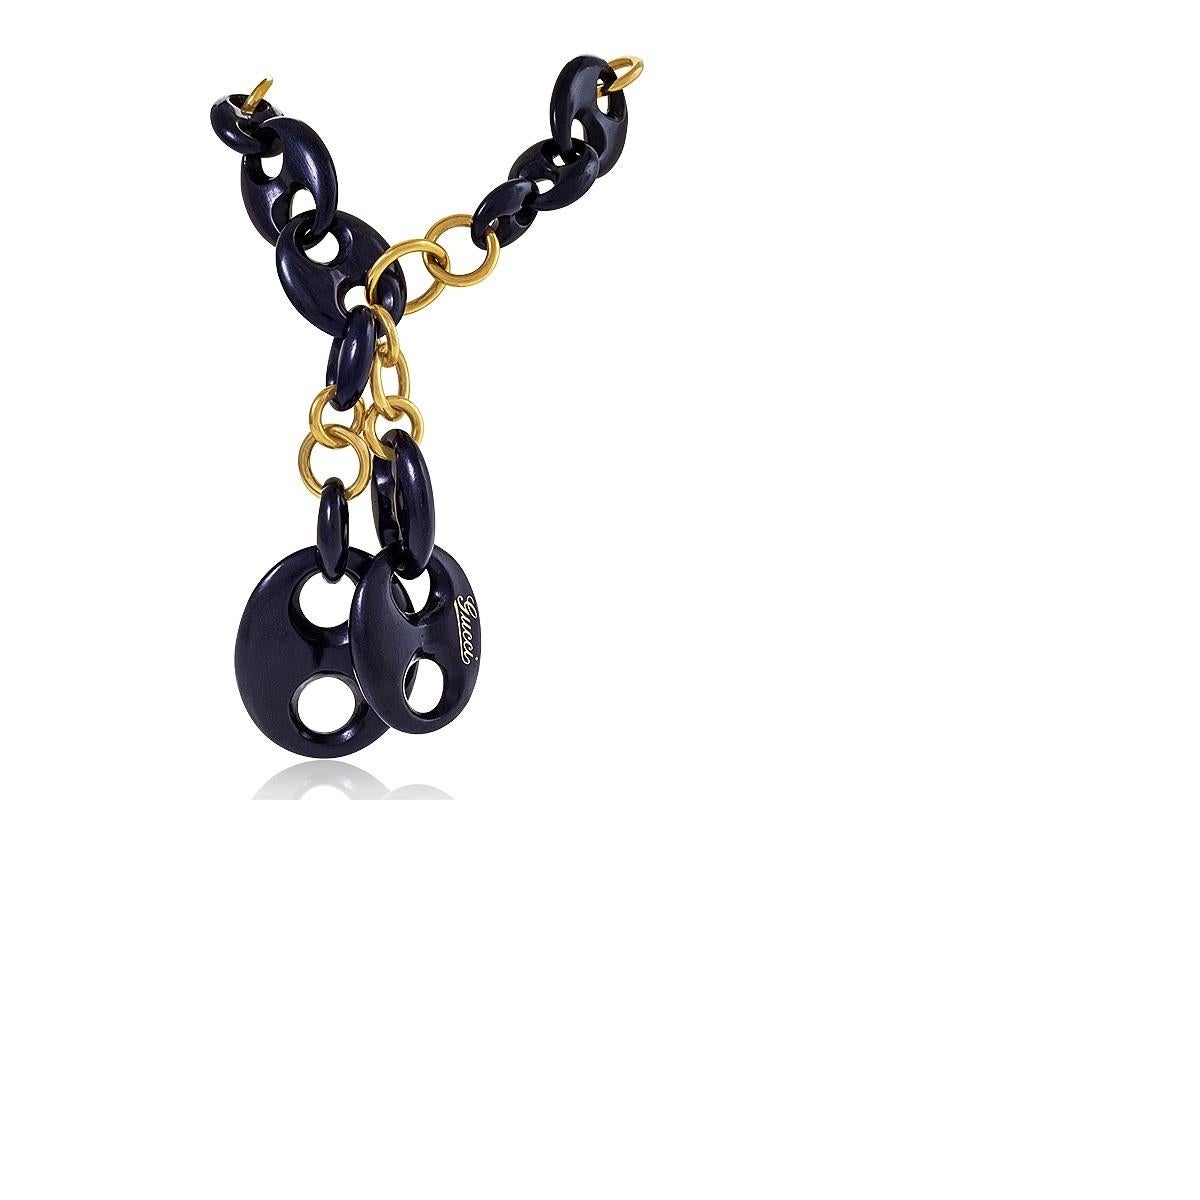 An Italian Late-20th Century 18 karat gold necklace with stylized ebony links by Gucci. The large-scale necklace features variously-proportioned ebony links connected with polished gold link sections. The pattern completes a circle around the neck